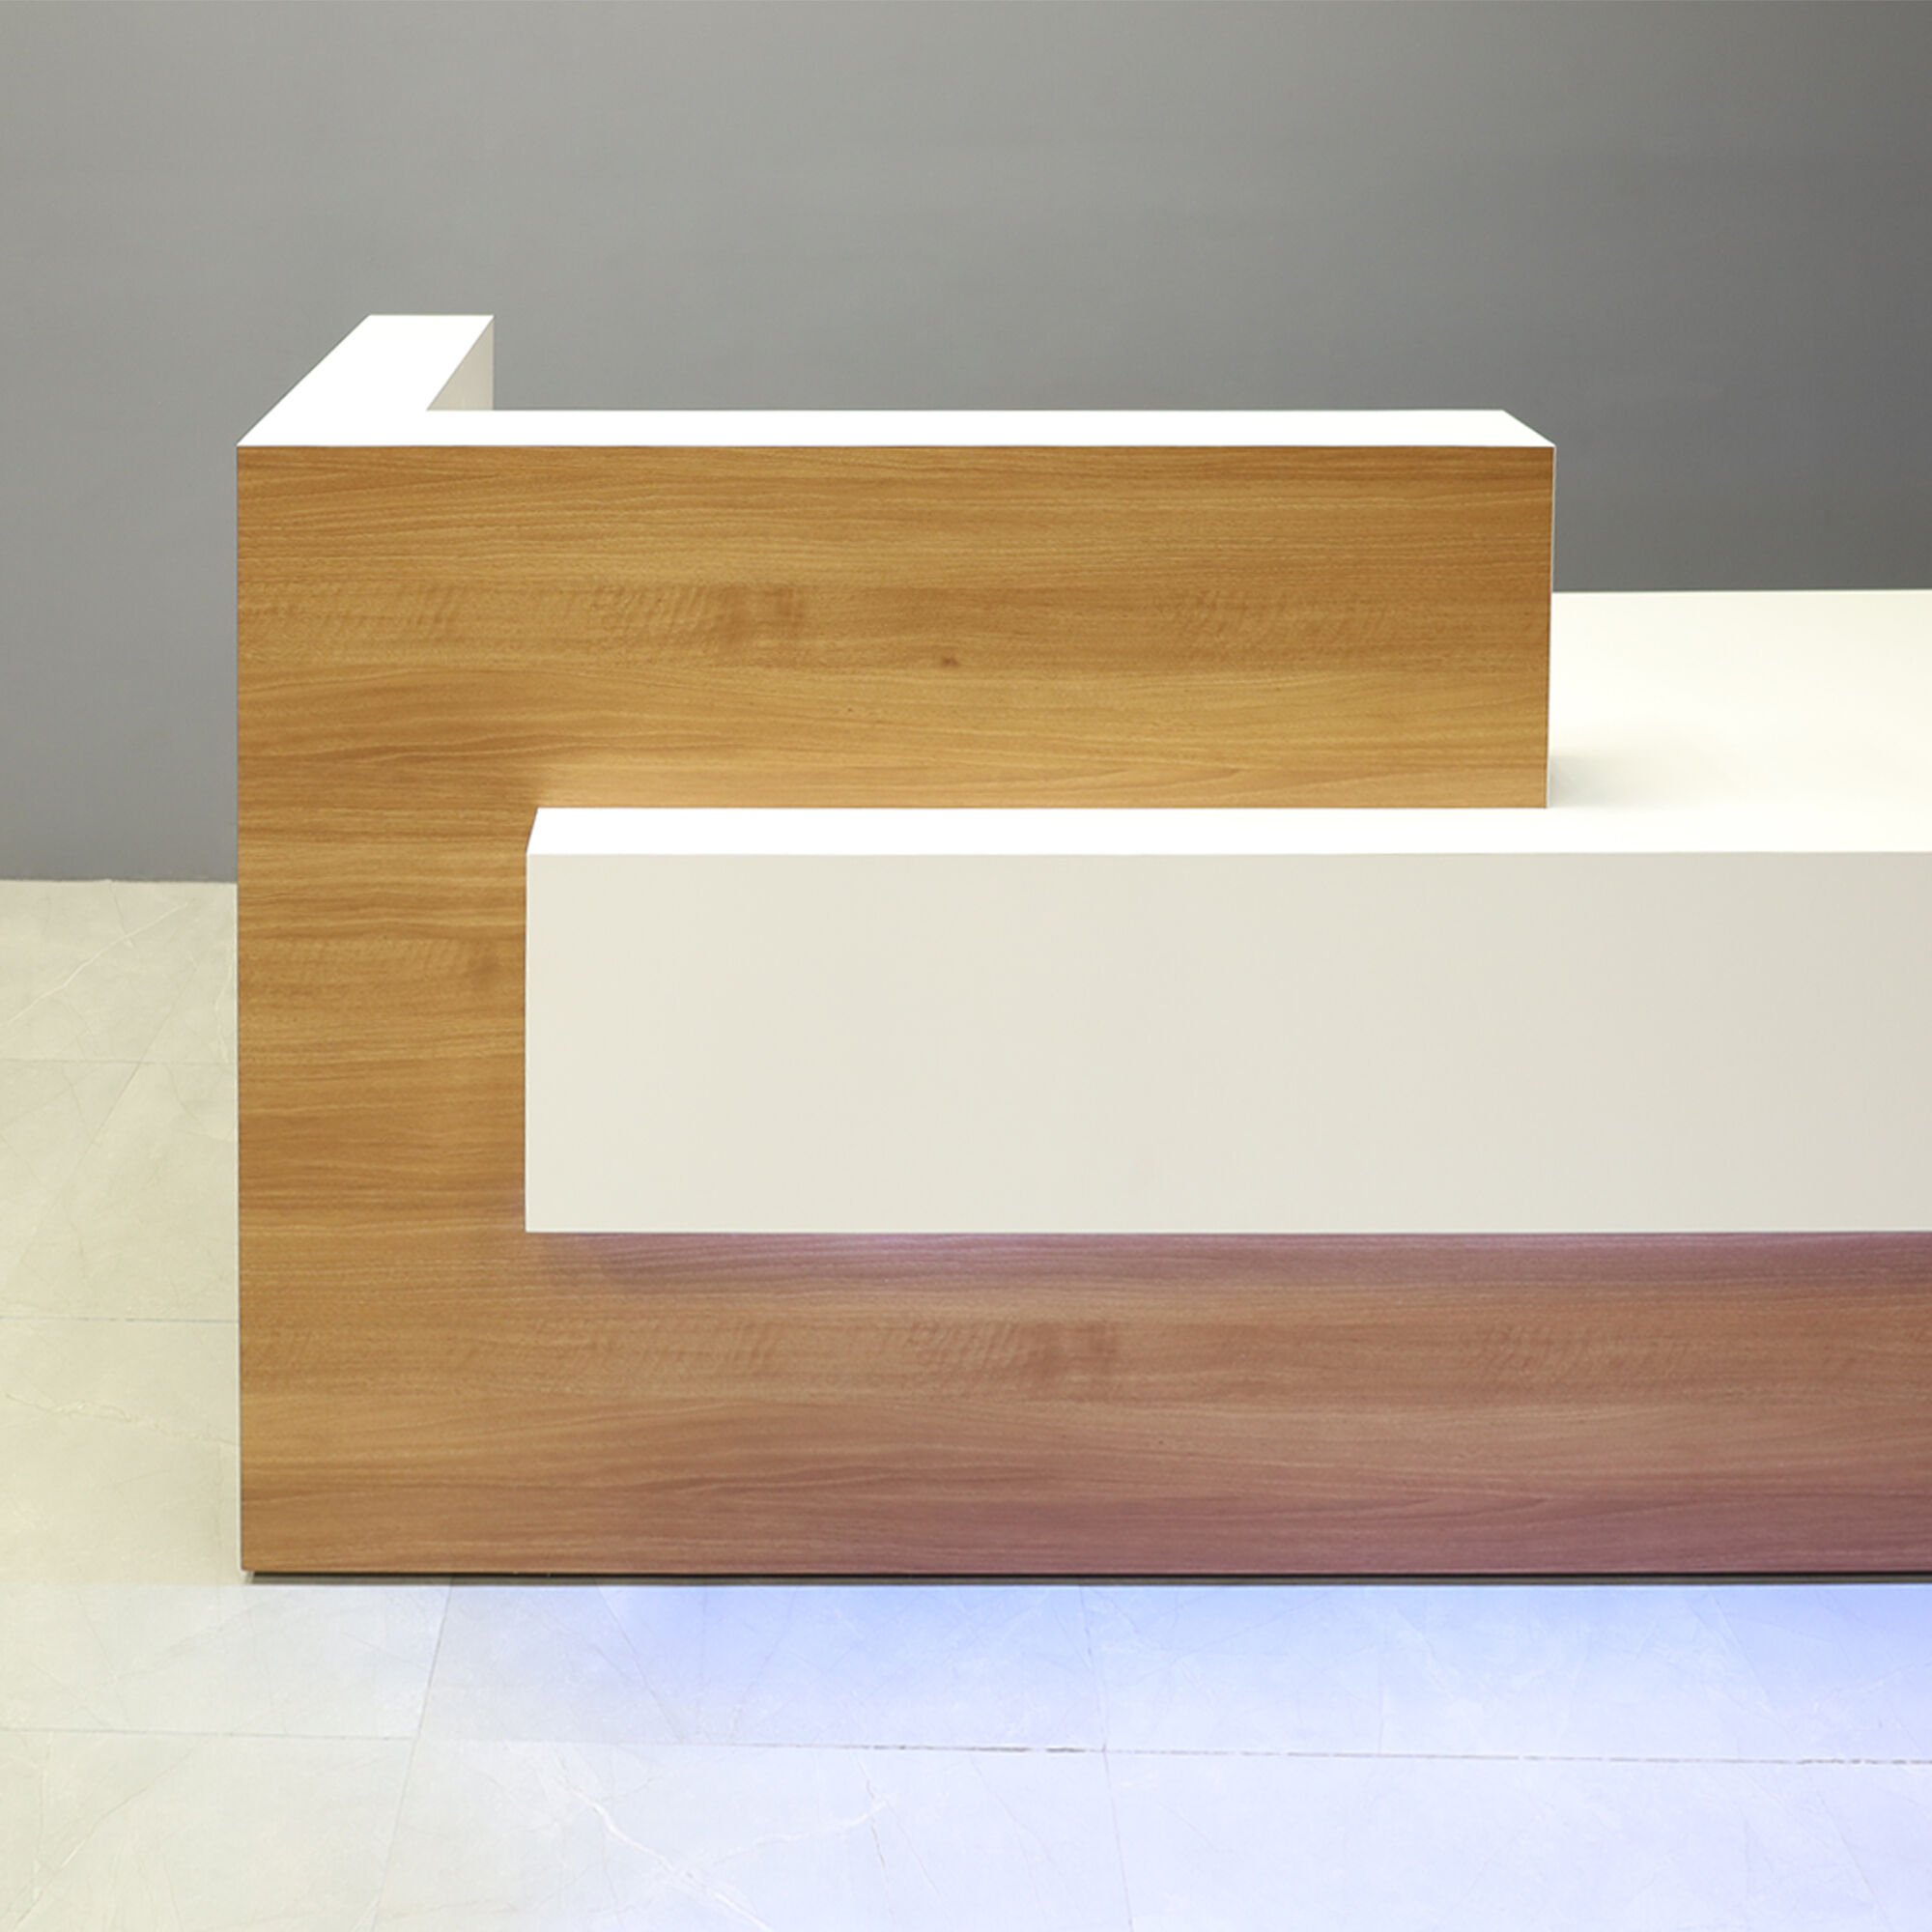 84-inch Atlanta Reception Desk in brazilwood countertop & base, dover off-white matte laminate workspace & front accent, with multi-colored LED, shown here.